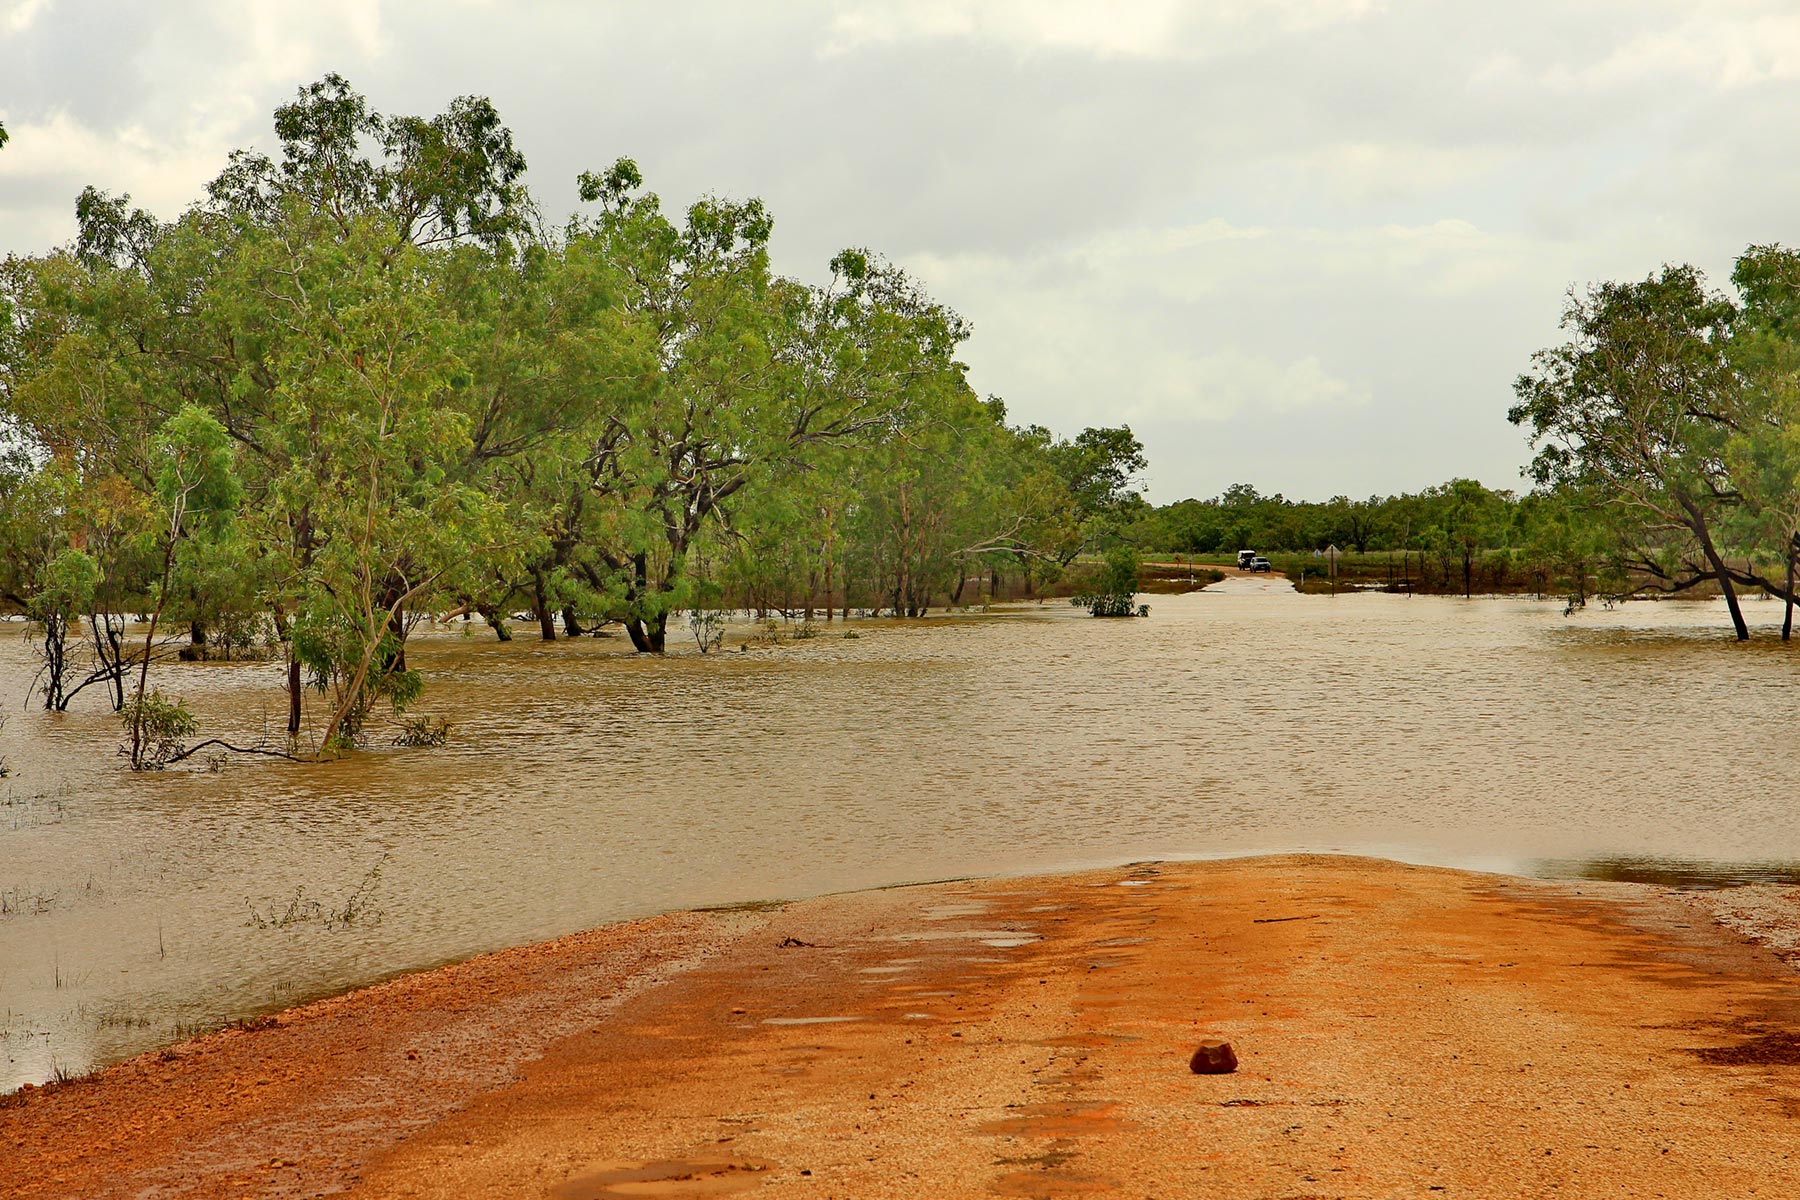 Floods in the Australian outback